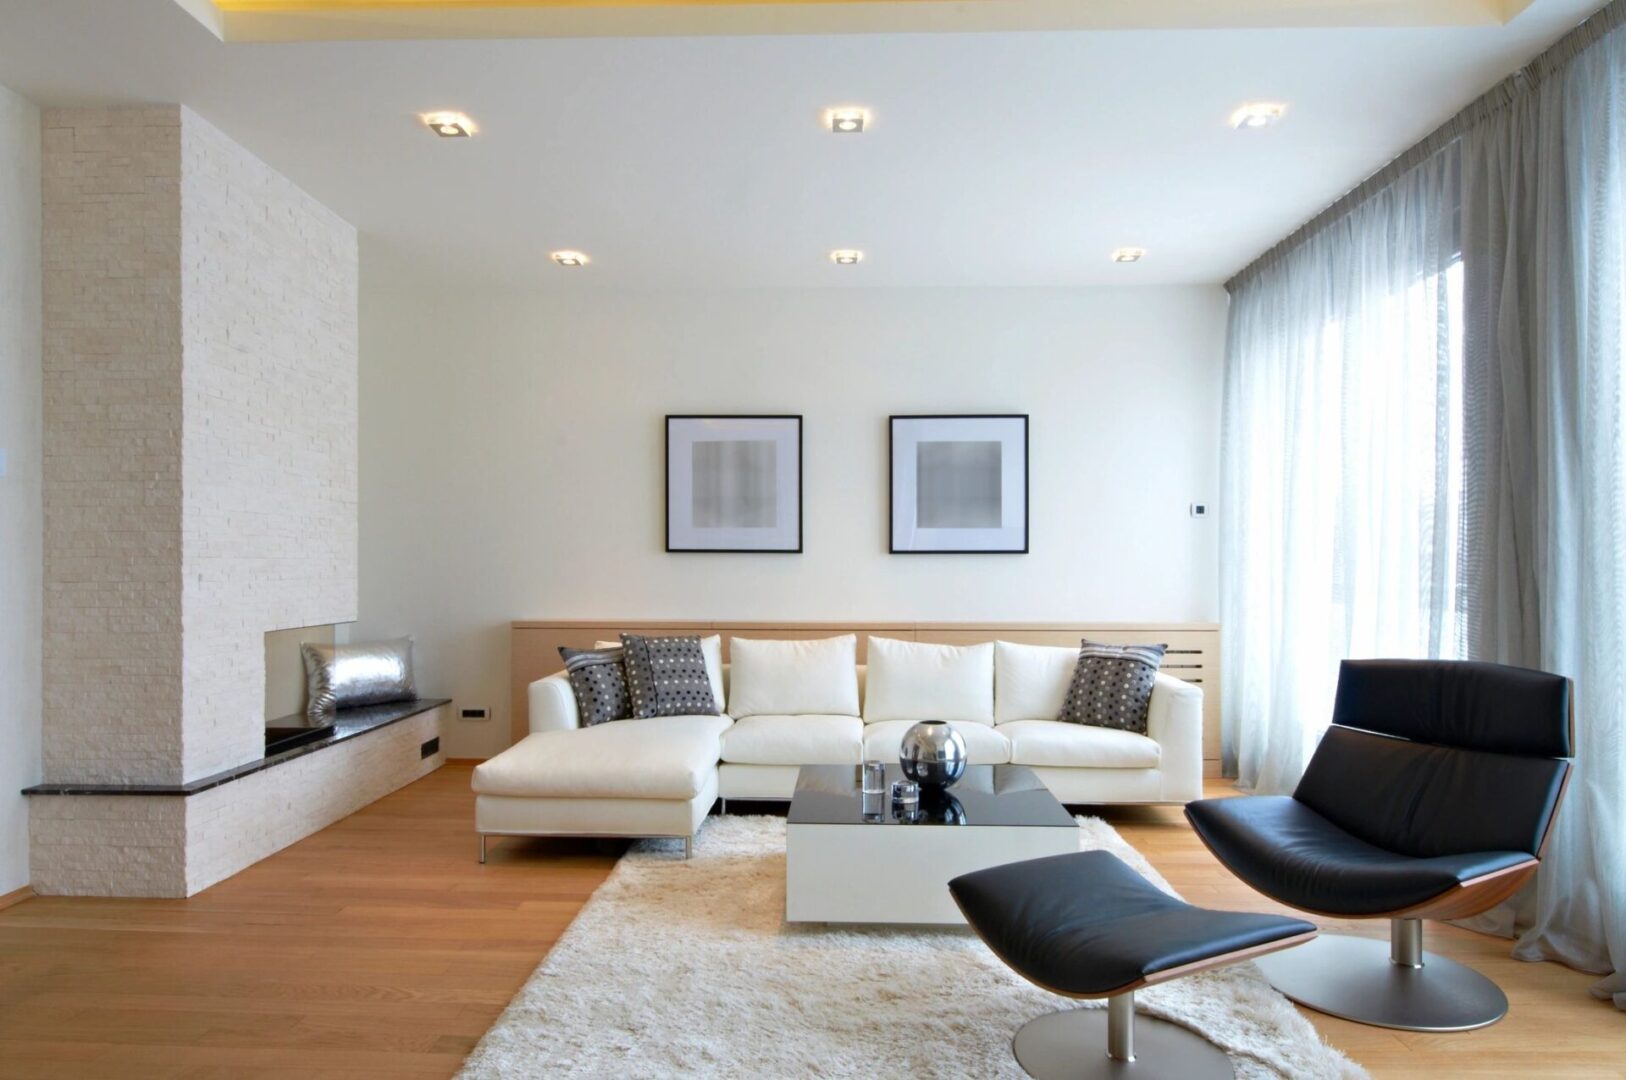 A living room with white furniture and a rug.